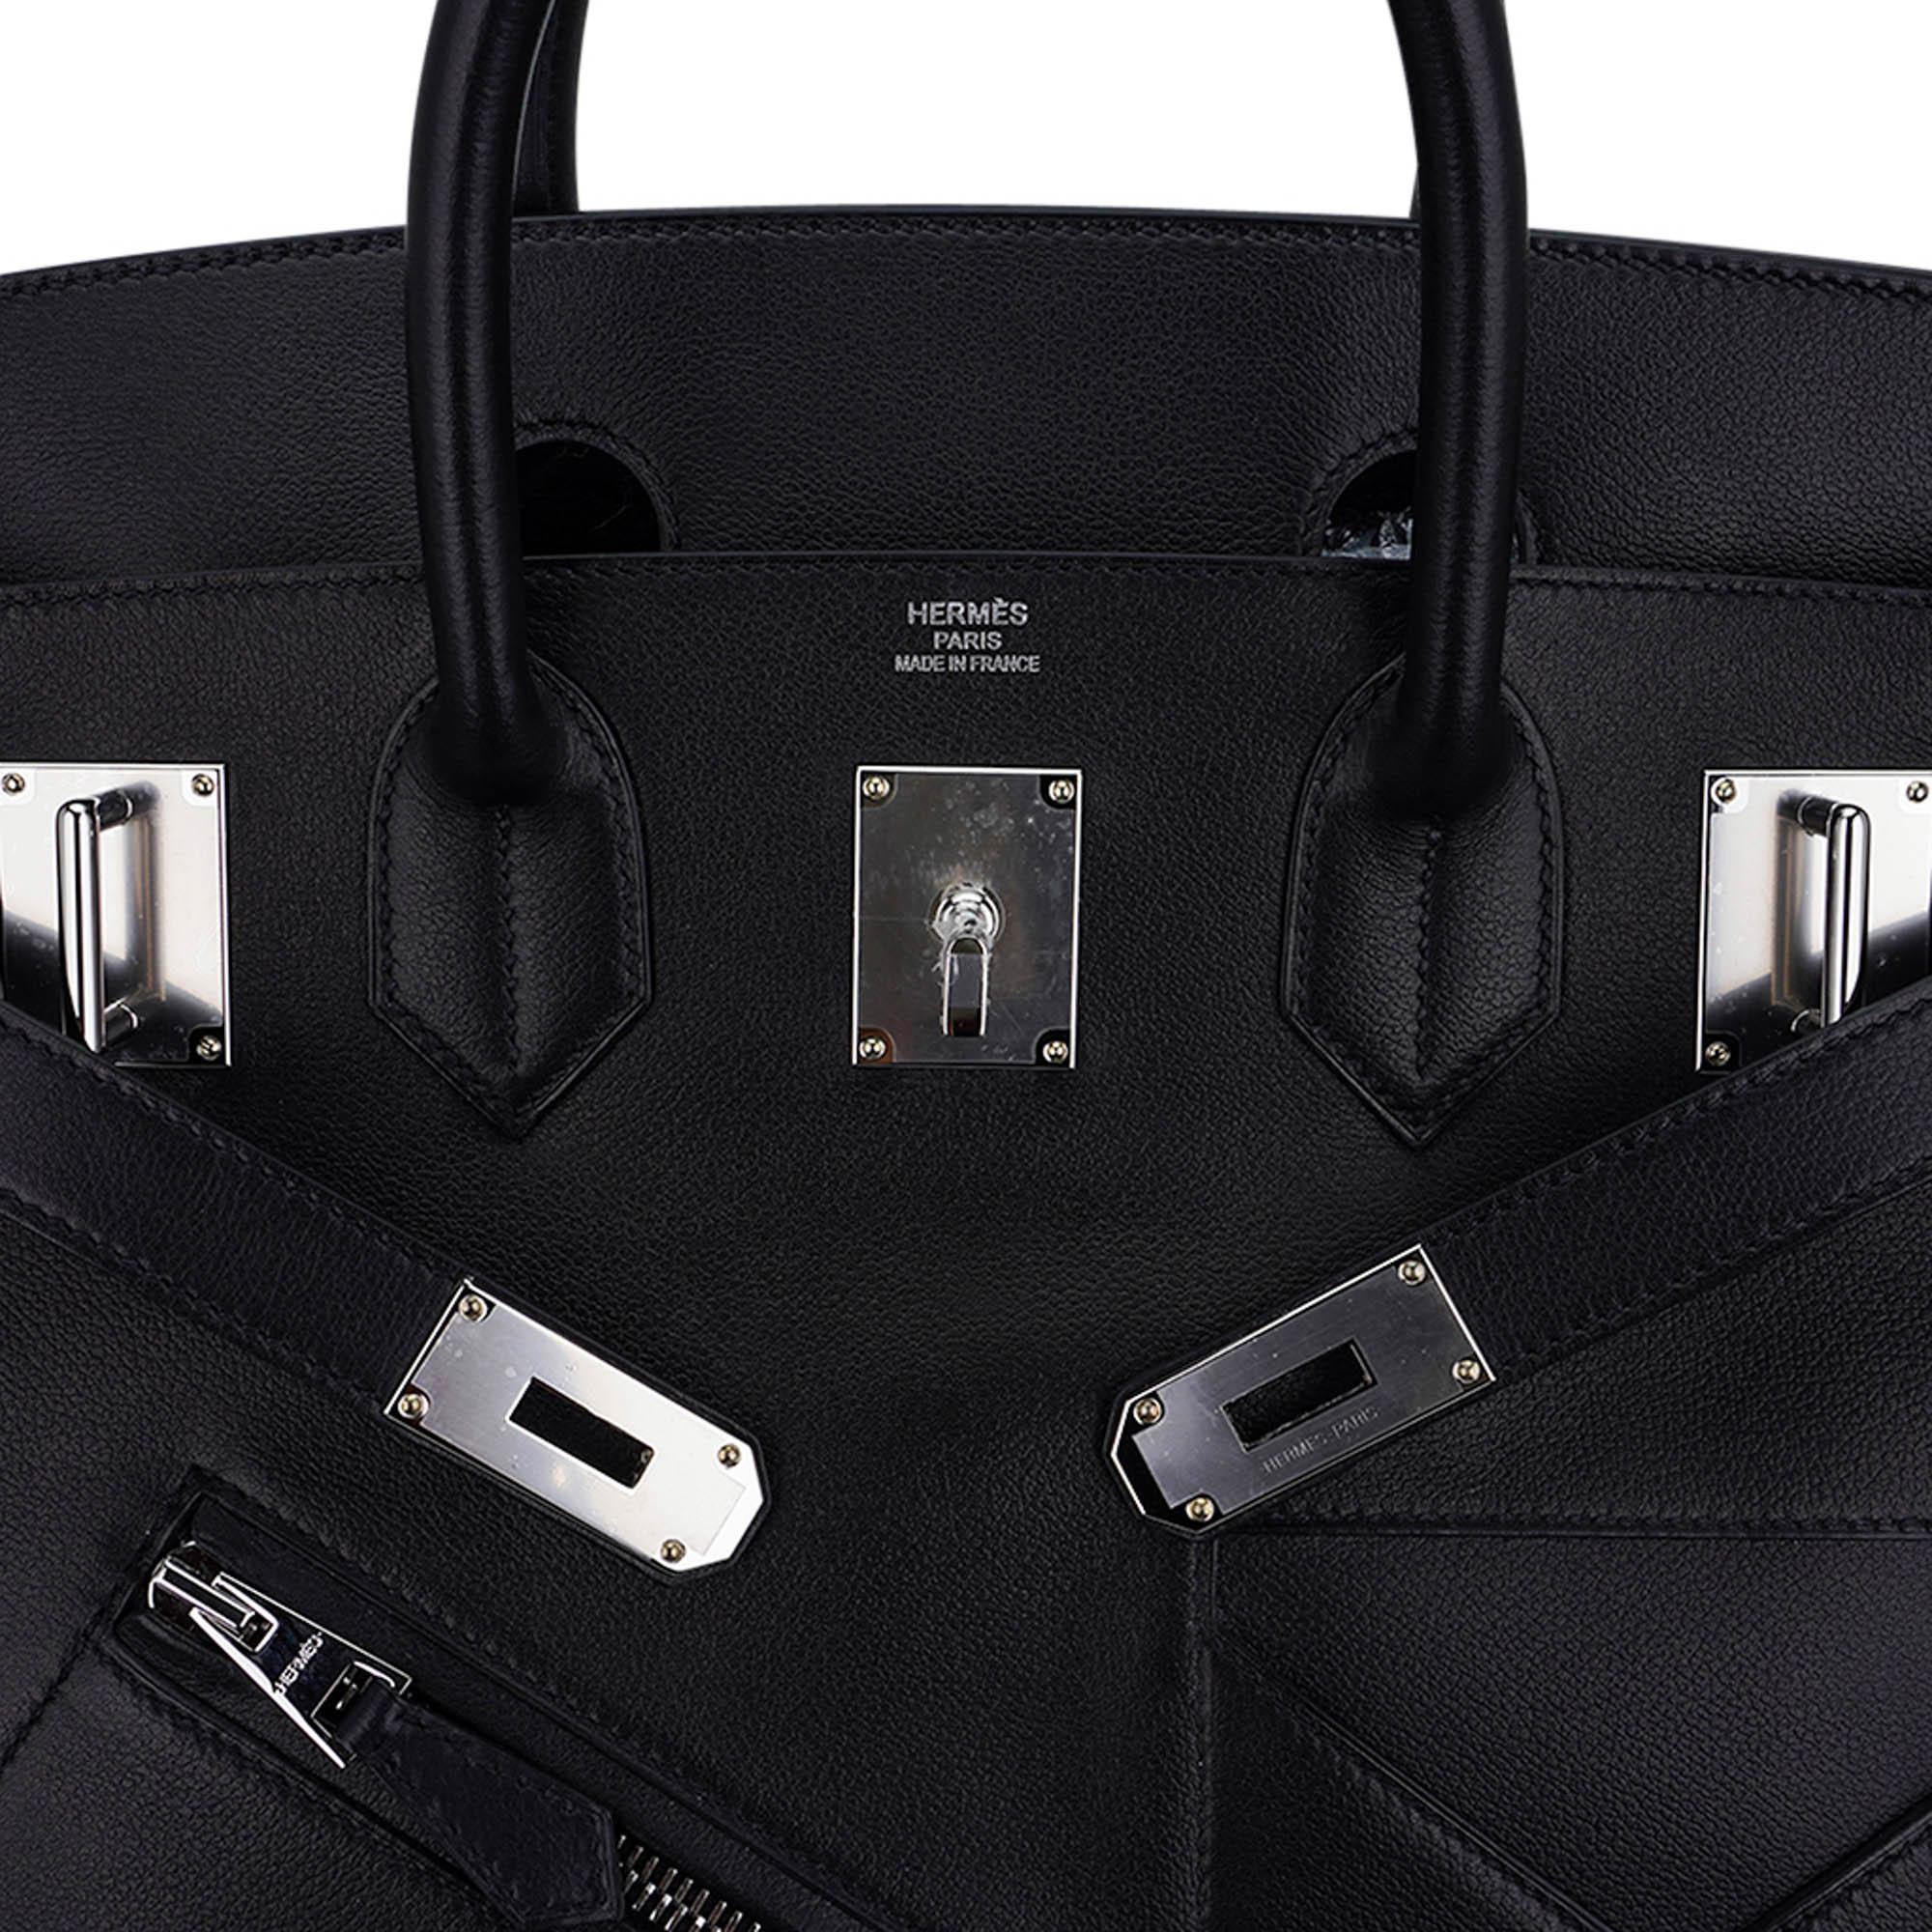 Hermes Rock Limited Edition HAC 40 Black Bag Volupto Leather Palladium Hardware In New Condition For Sale In Miami, FL